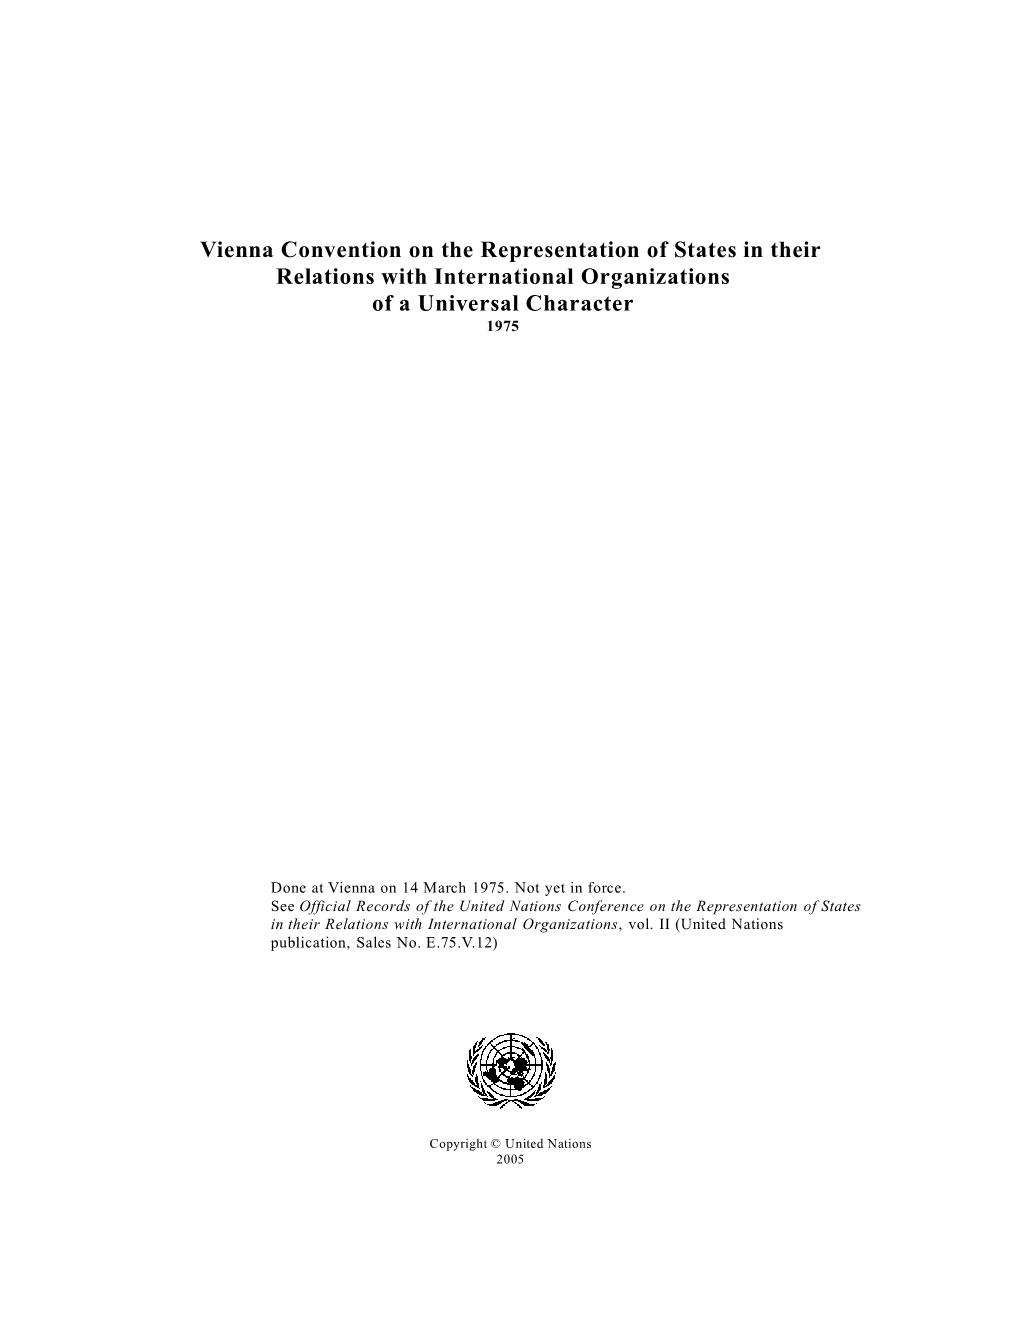 Vienna Convention on the Representation of States in Their Relations with International Organizations of a Universal Character 1975